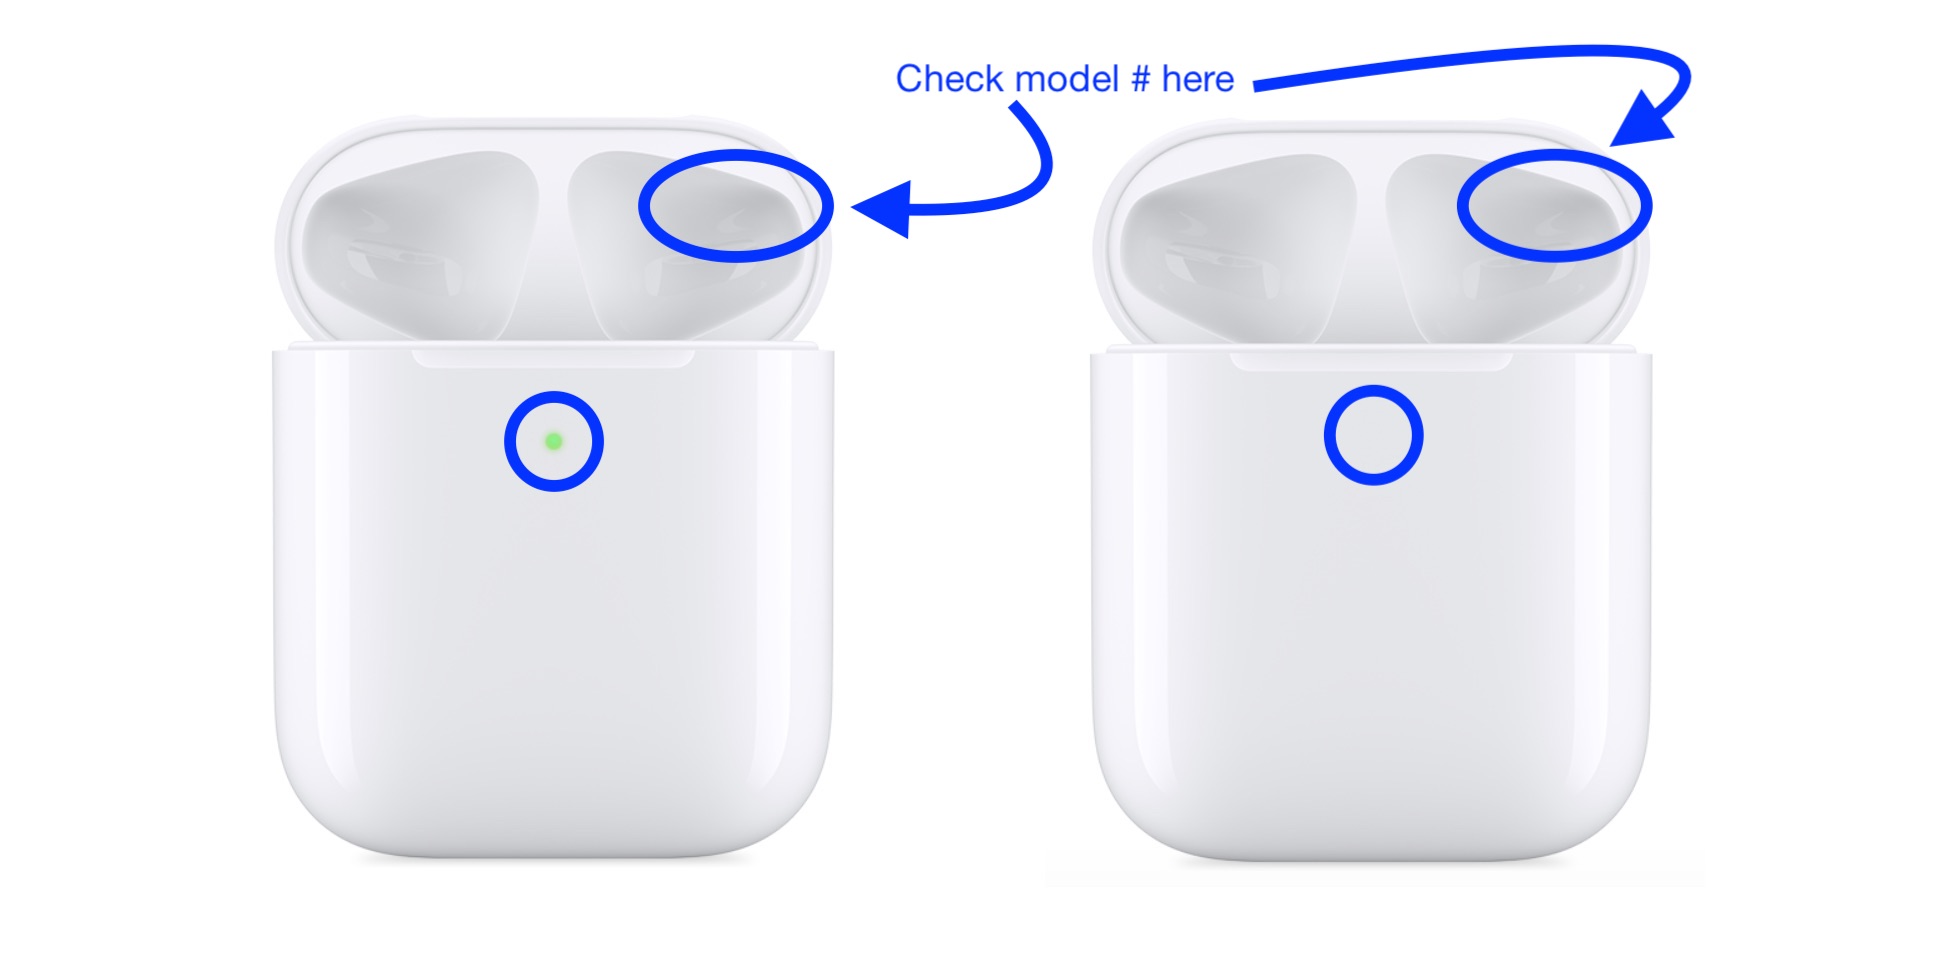 Sociable lotus Monastery How to check the model of your AirPods and charging case - 9to5Mac